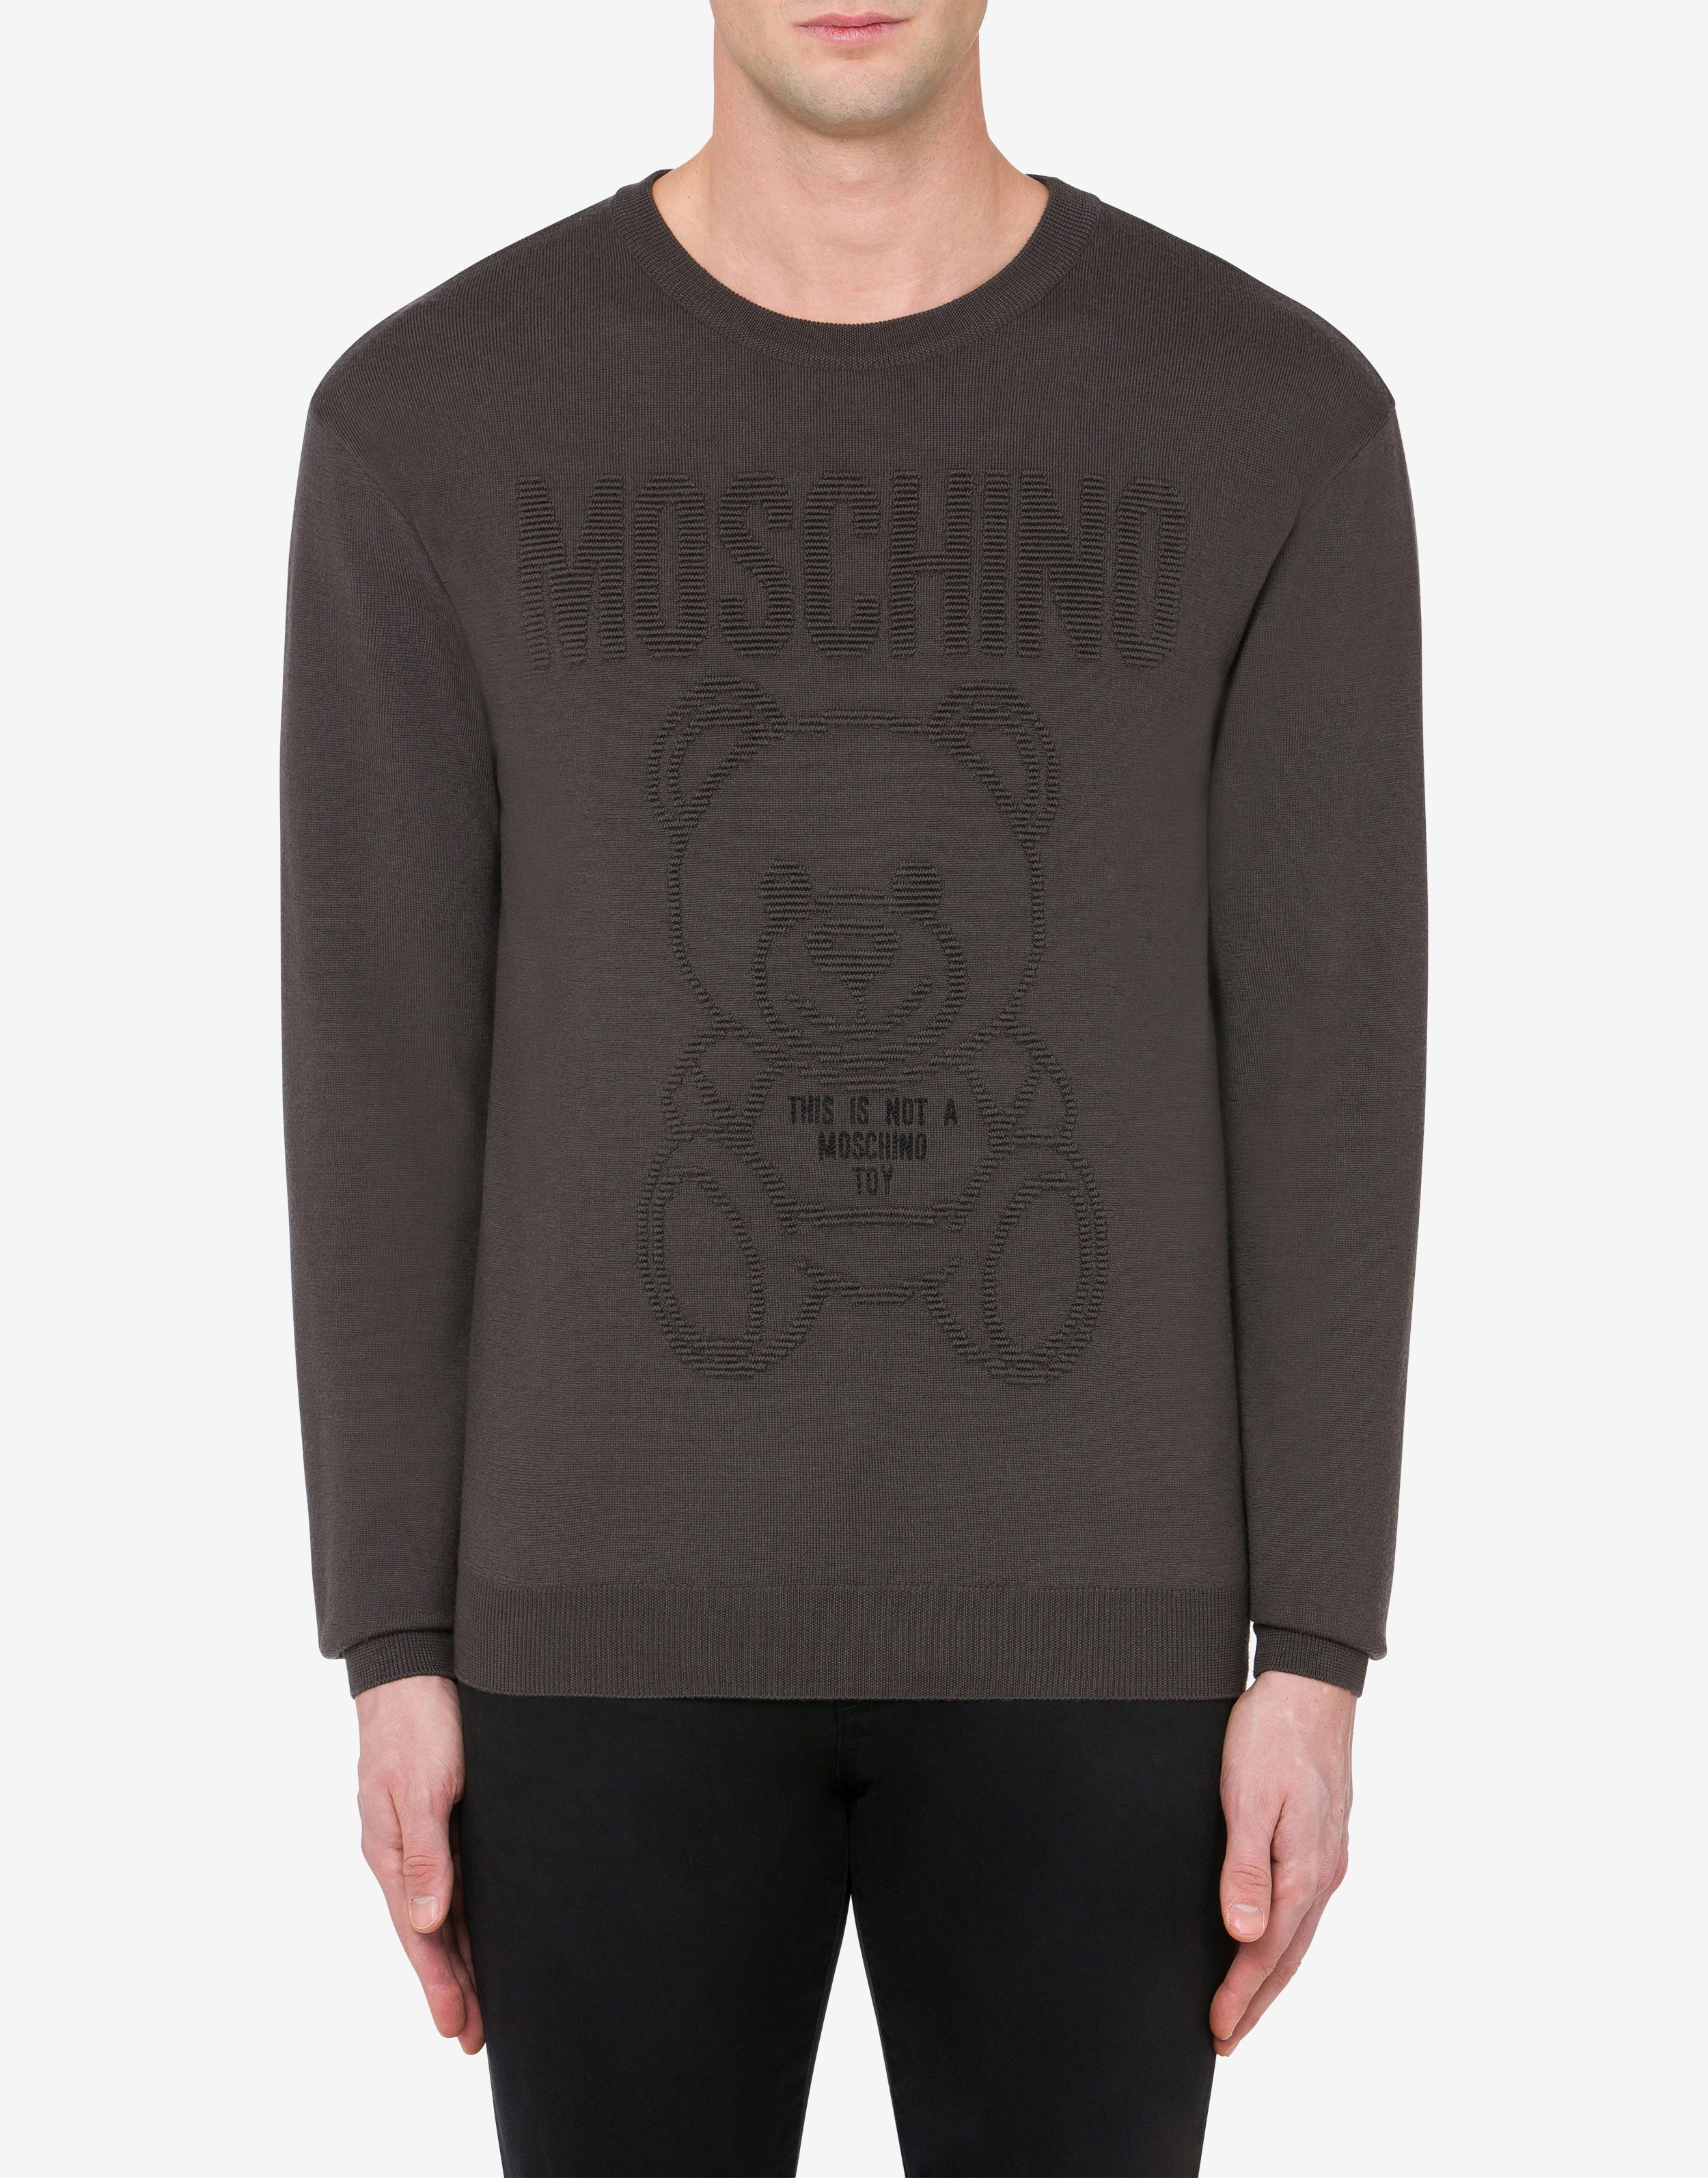 MOSCHINO SWEATSHIRT WITH COLORFUL BEAR GRAPHIC